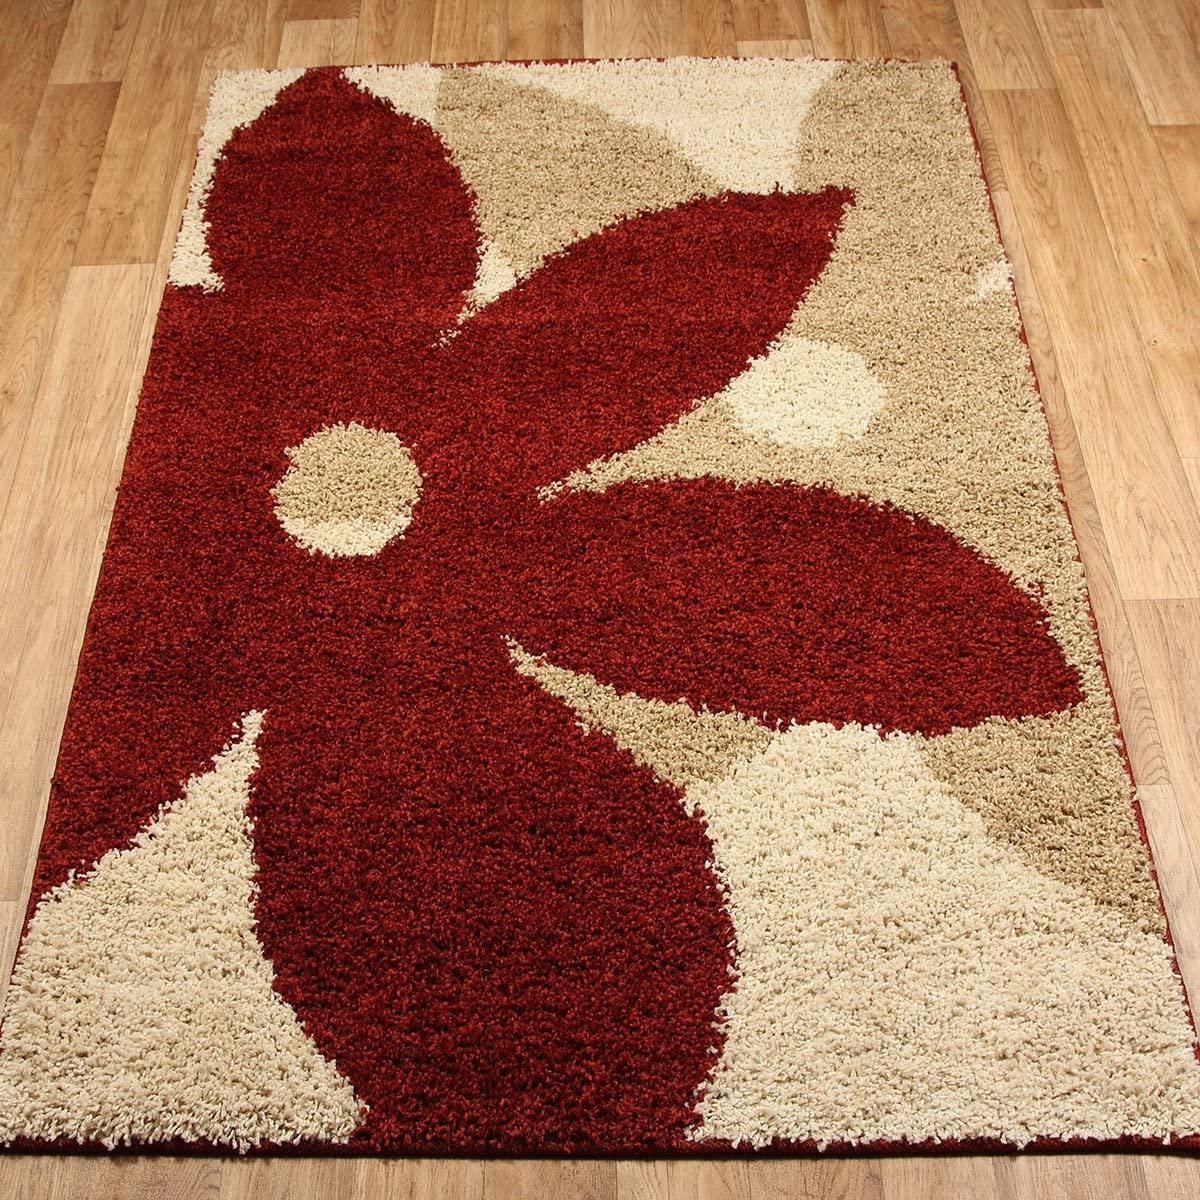  Best Area Rugs For Wood Floors